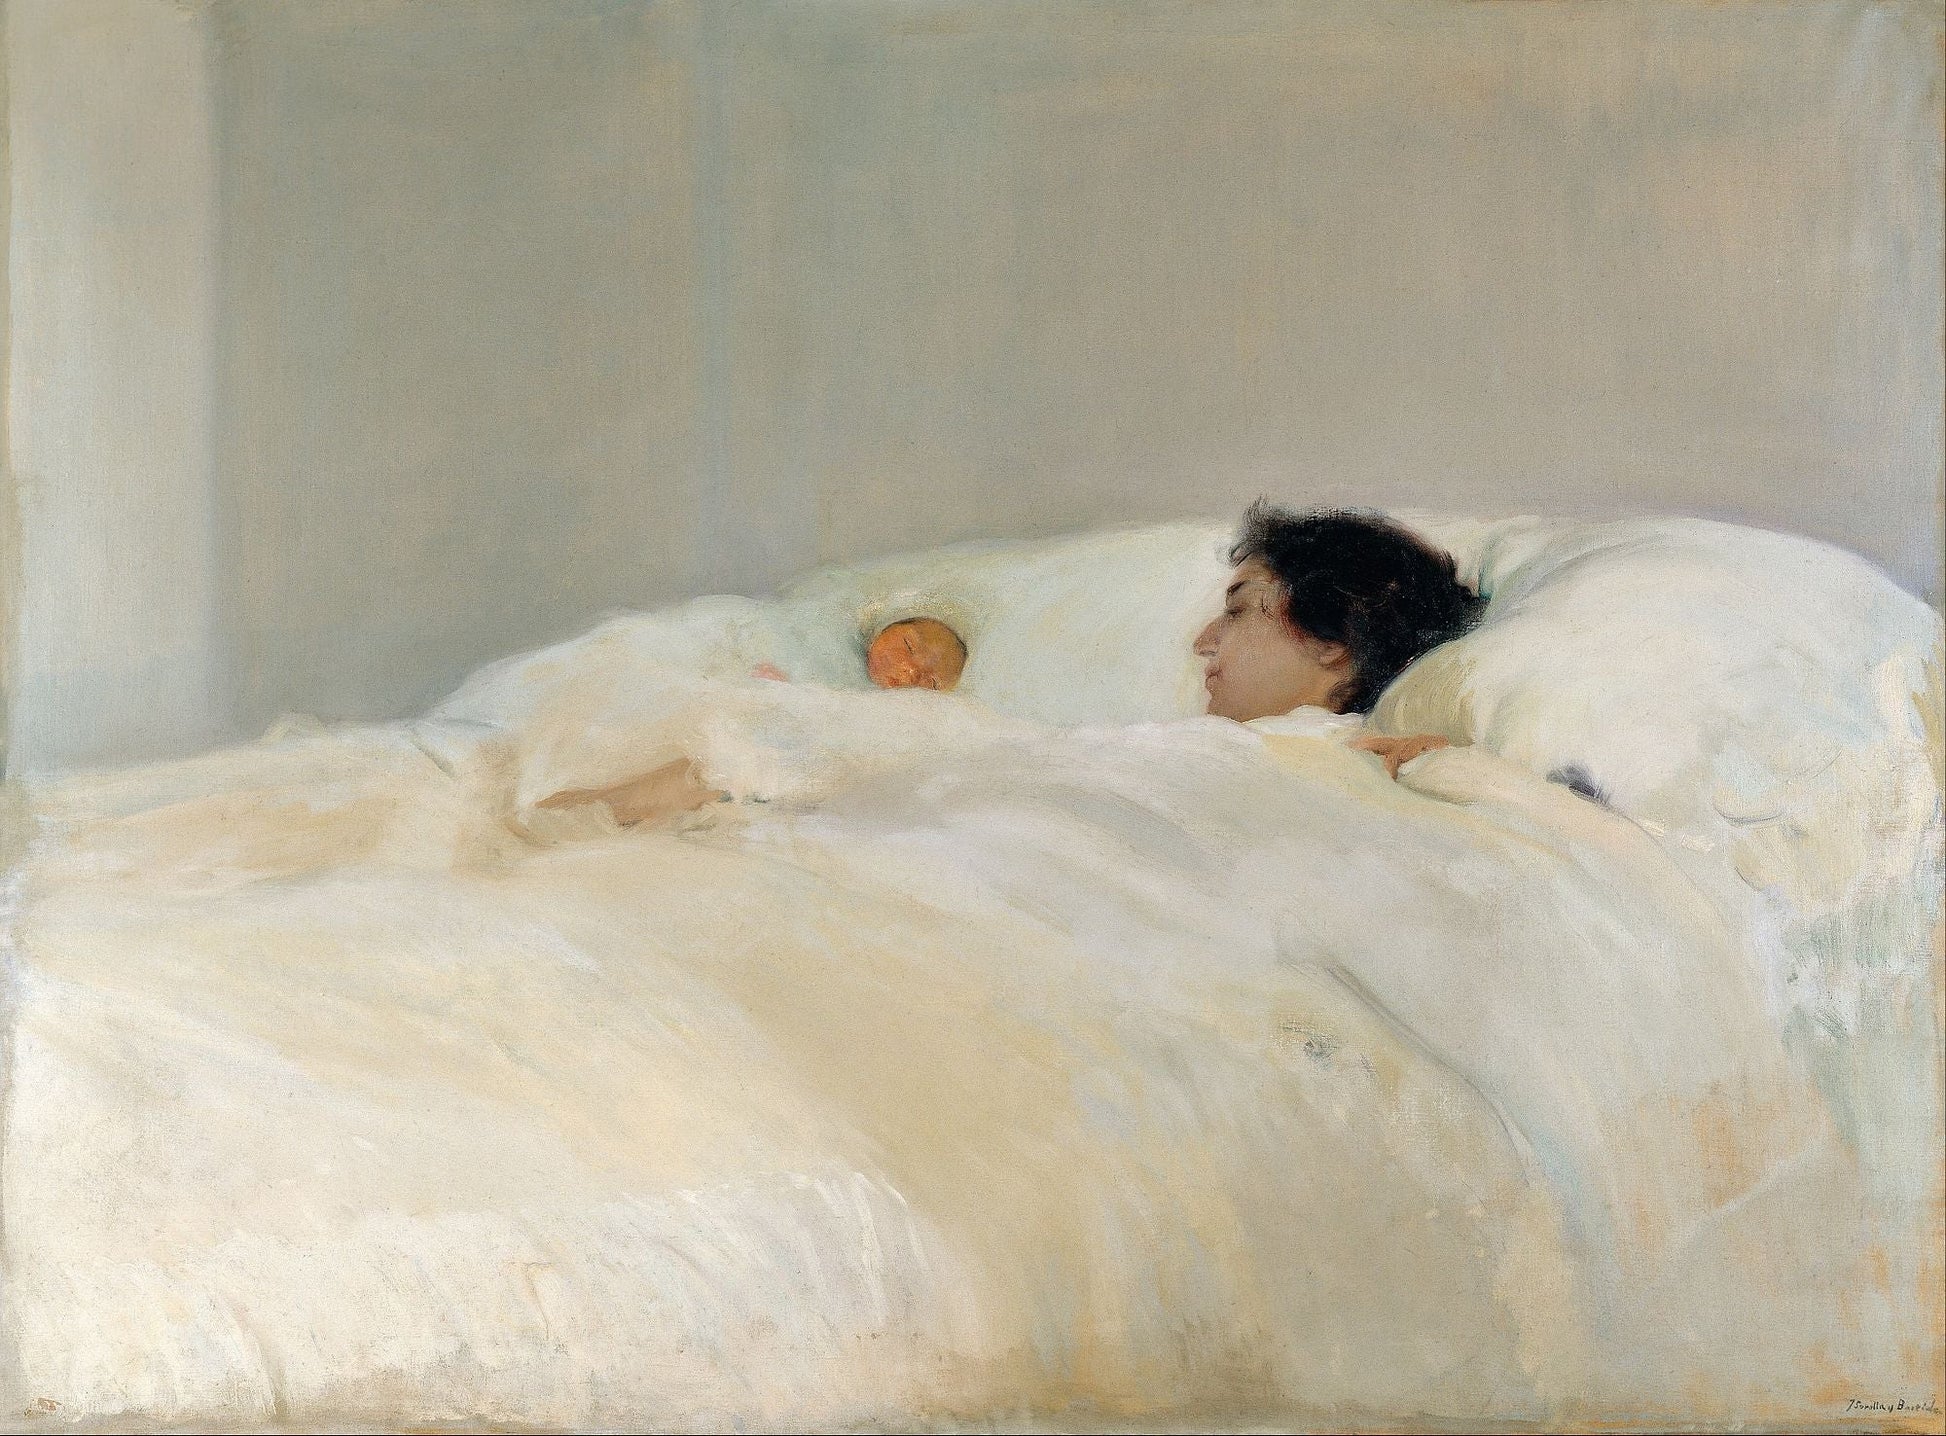 Mother (with sleeping child) art print (1895) | Joaquin Sorolla  The Trumpet Shop   